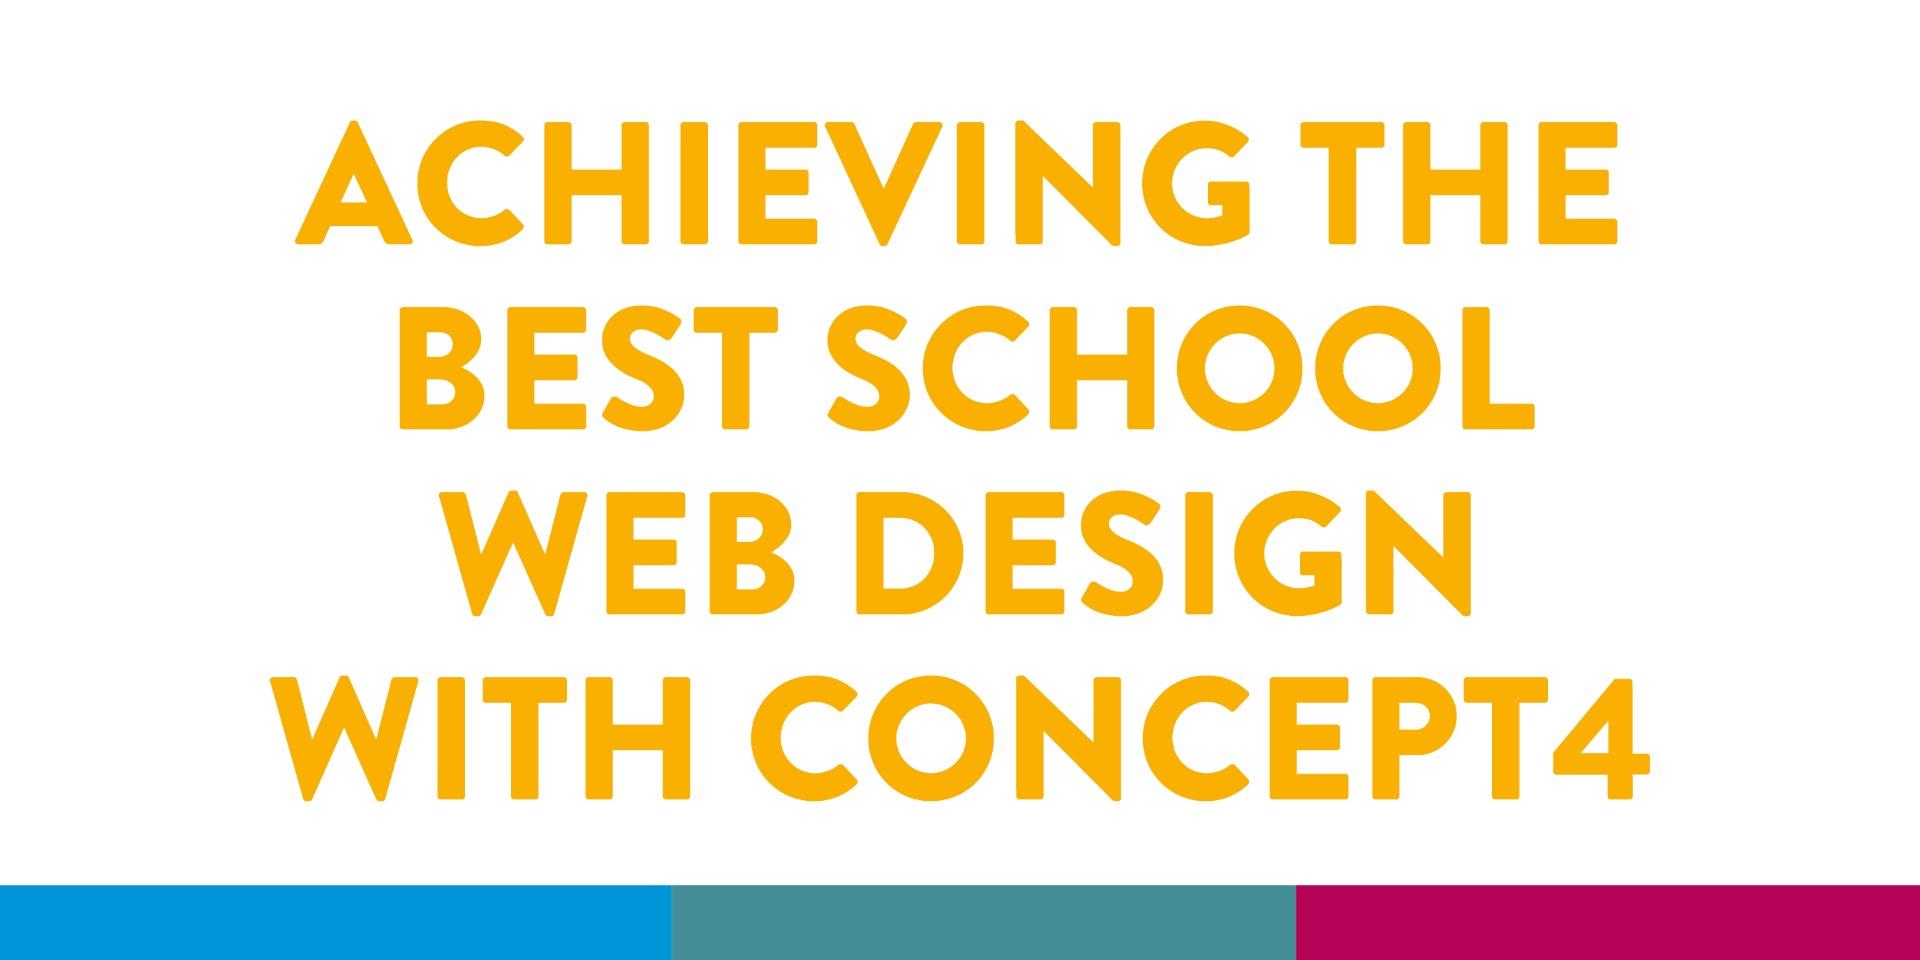 Achieving the best school web design with Concept4